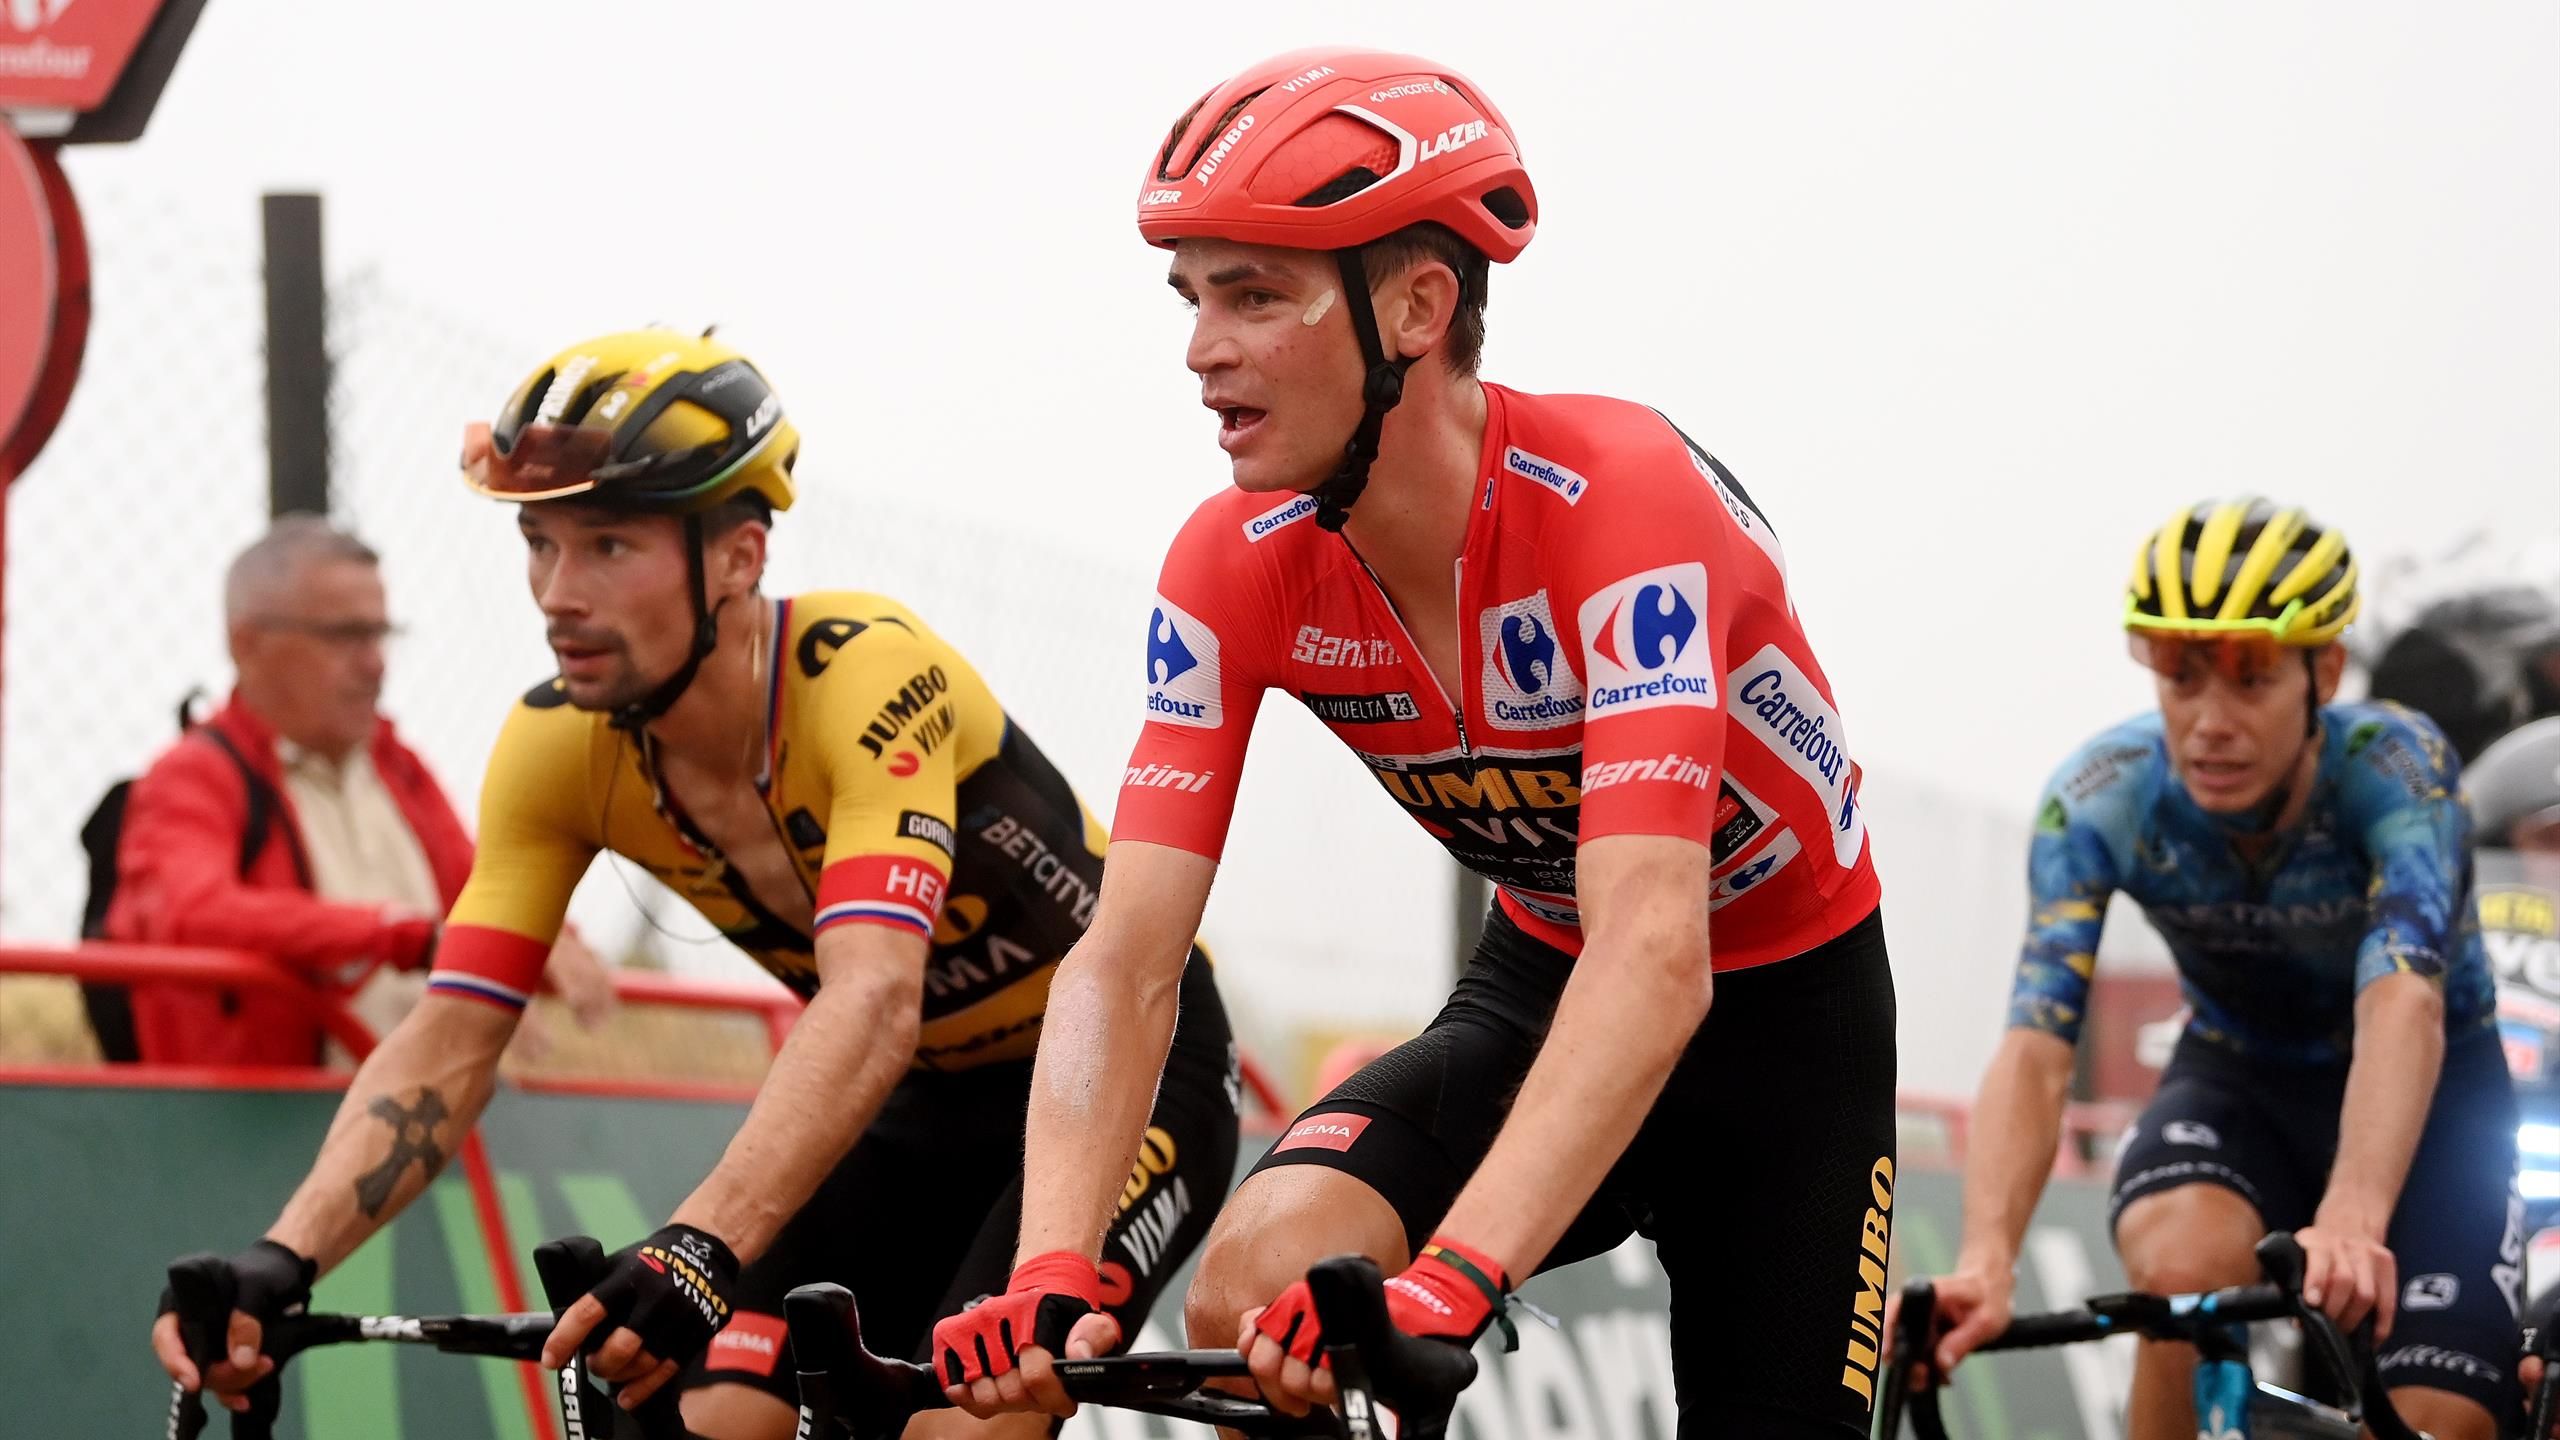 La Vuelta |  Stage 11 of the live recap – relaxed legs, flat ride, finish in Laguna Negra